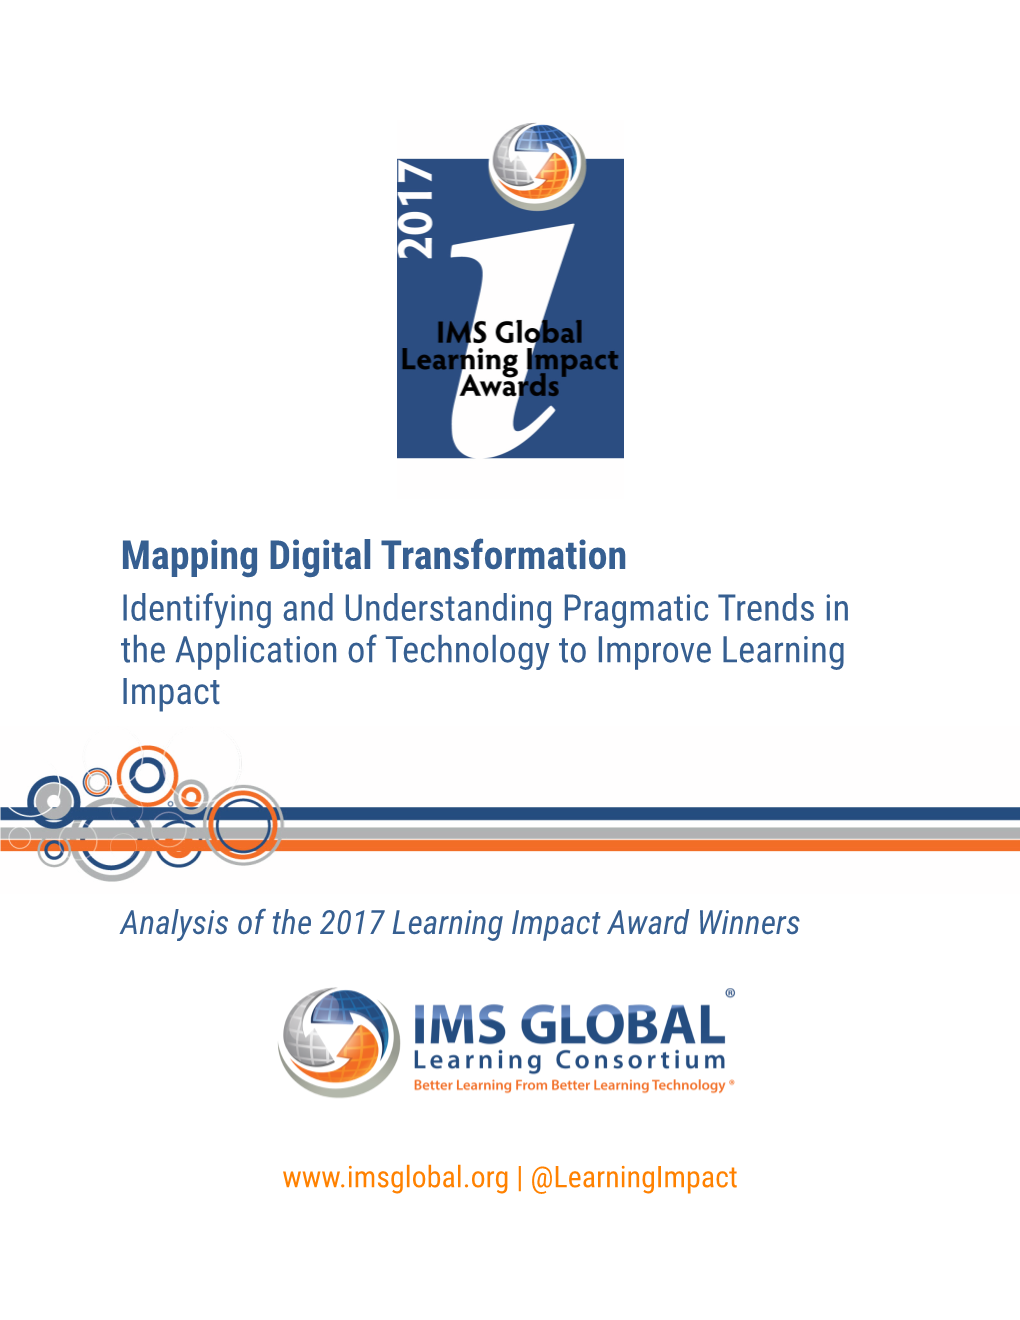 Mapping Digital Transformation Identifying and Understanding Pragmatic Trends in the Application of Technology to Improve Learning Impact